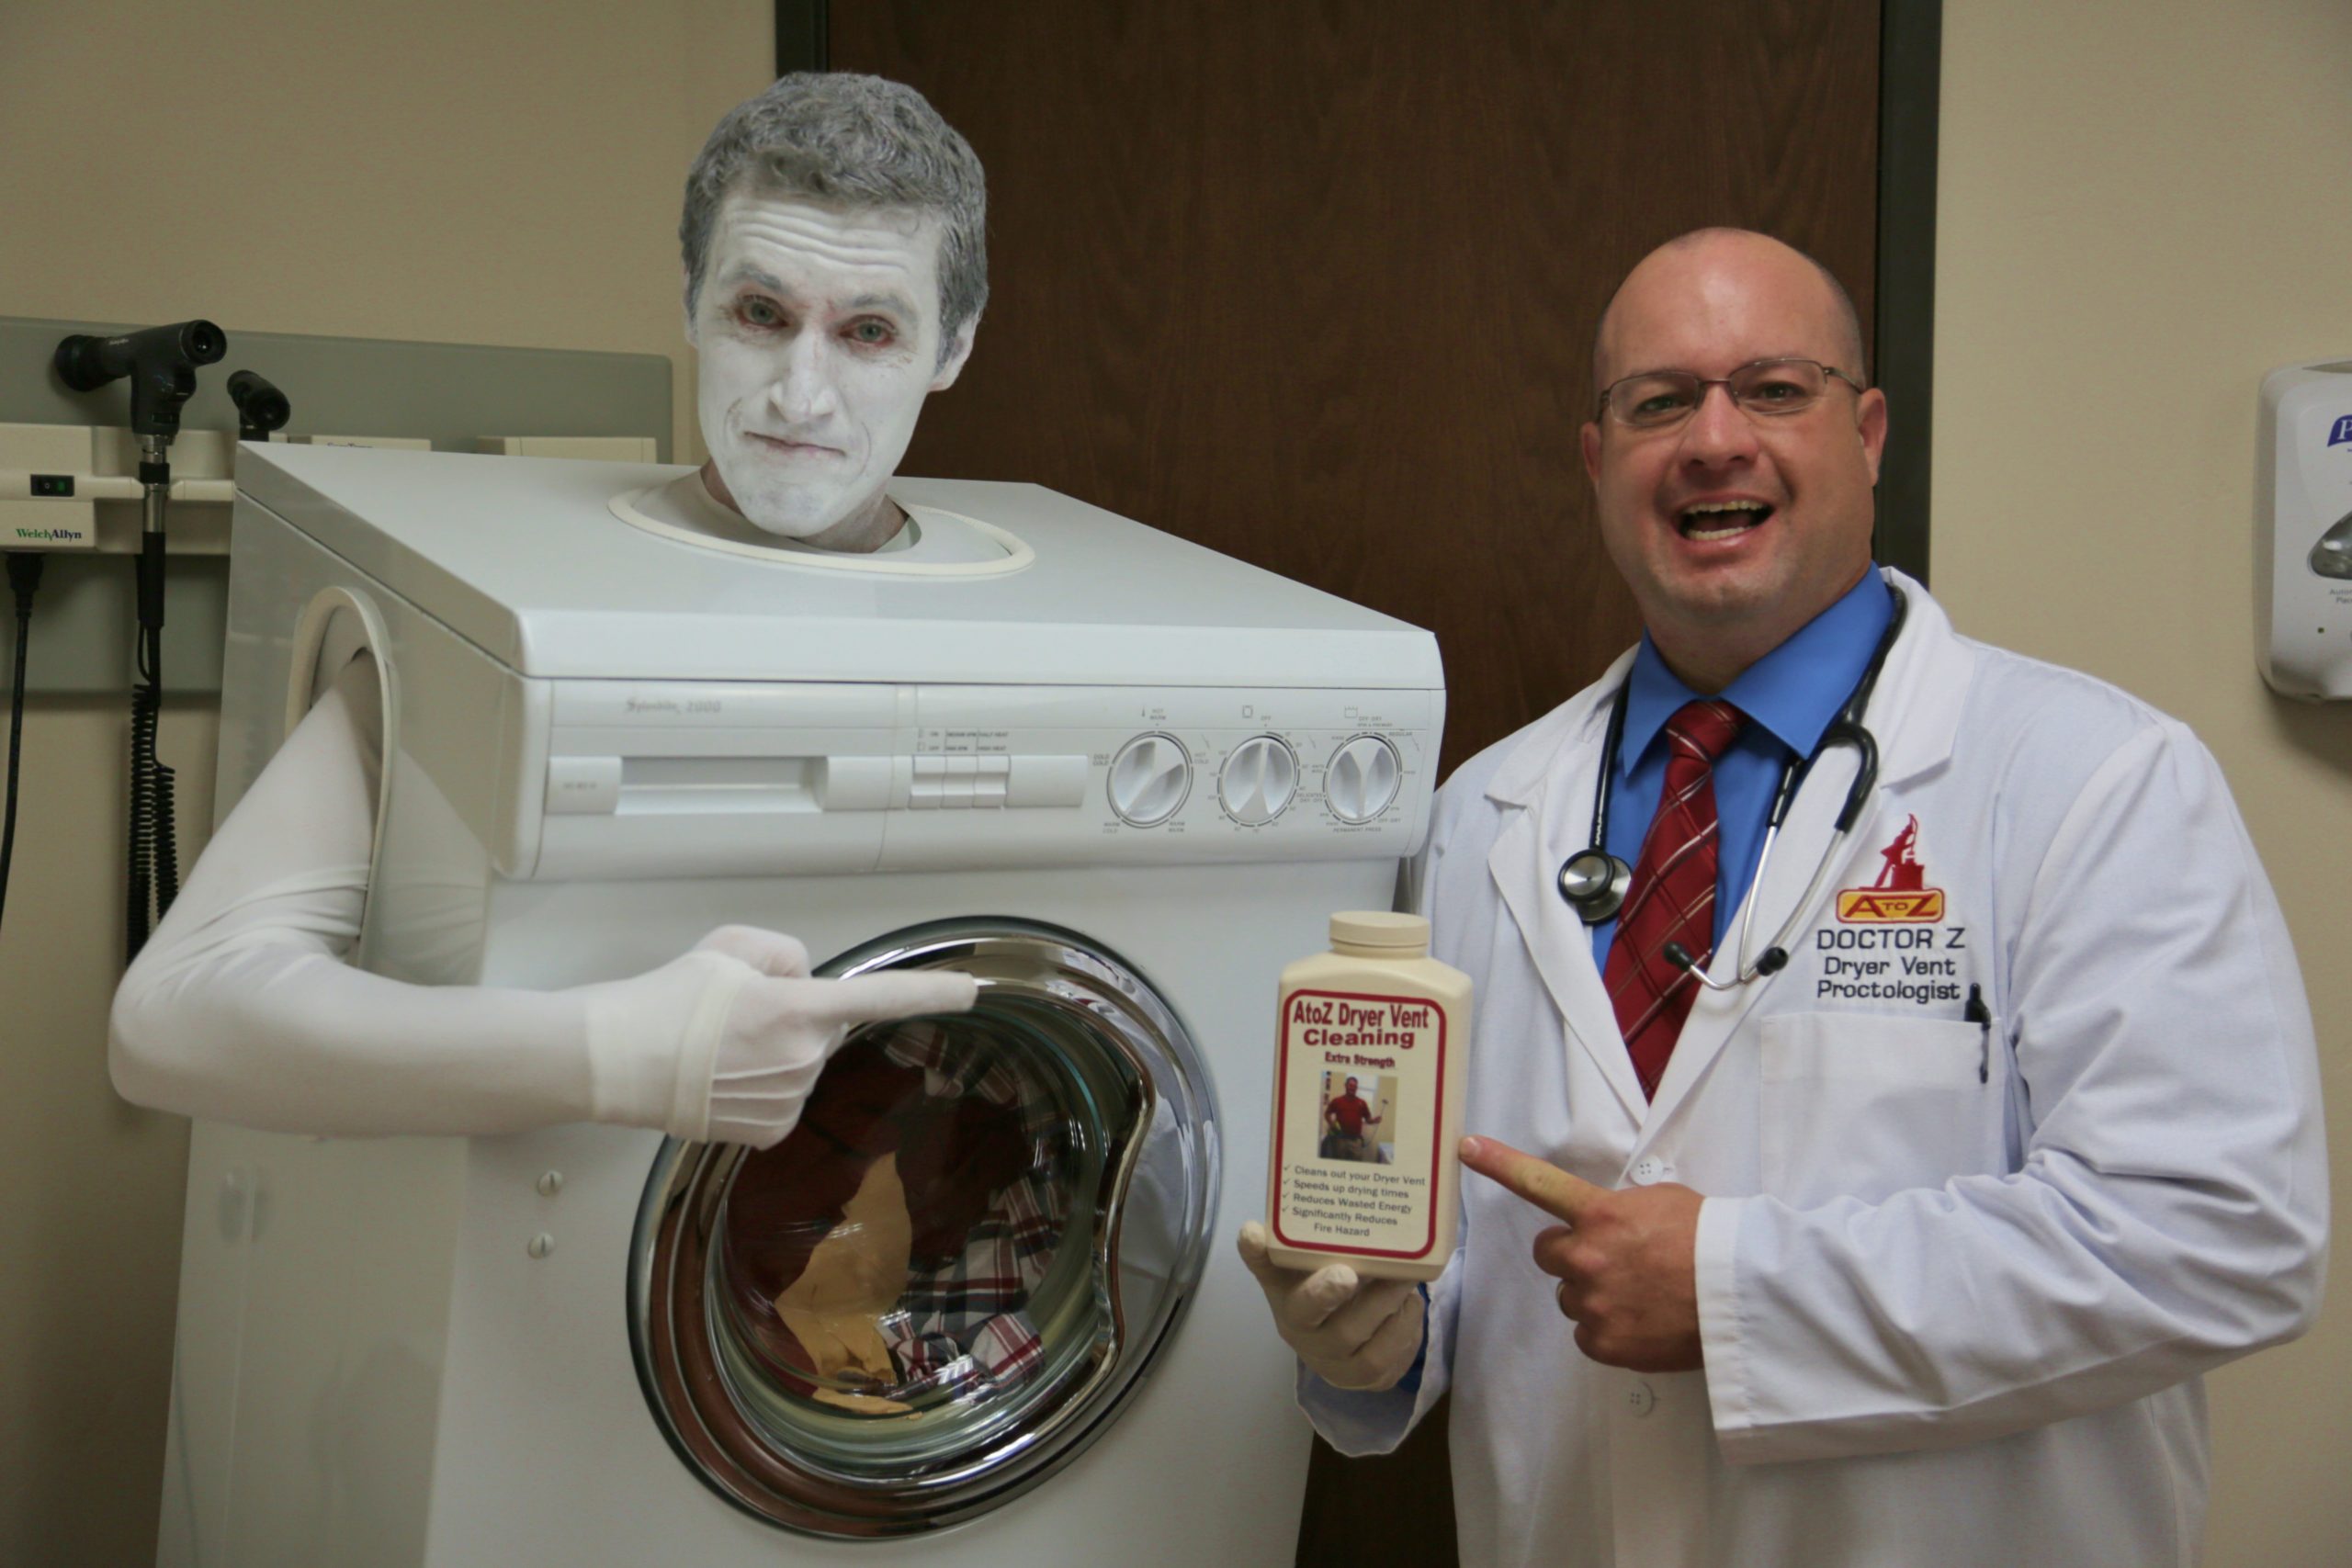 man with white painted face wearing dryer costume next to a man in a doctor outfit